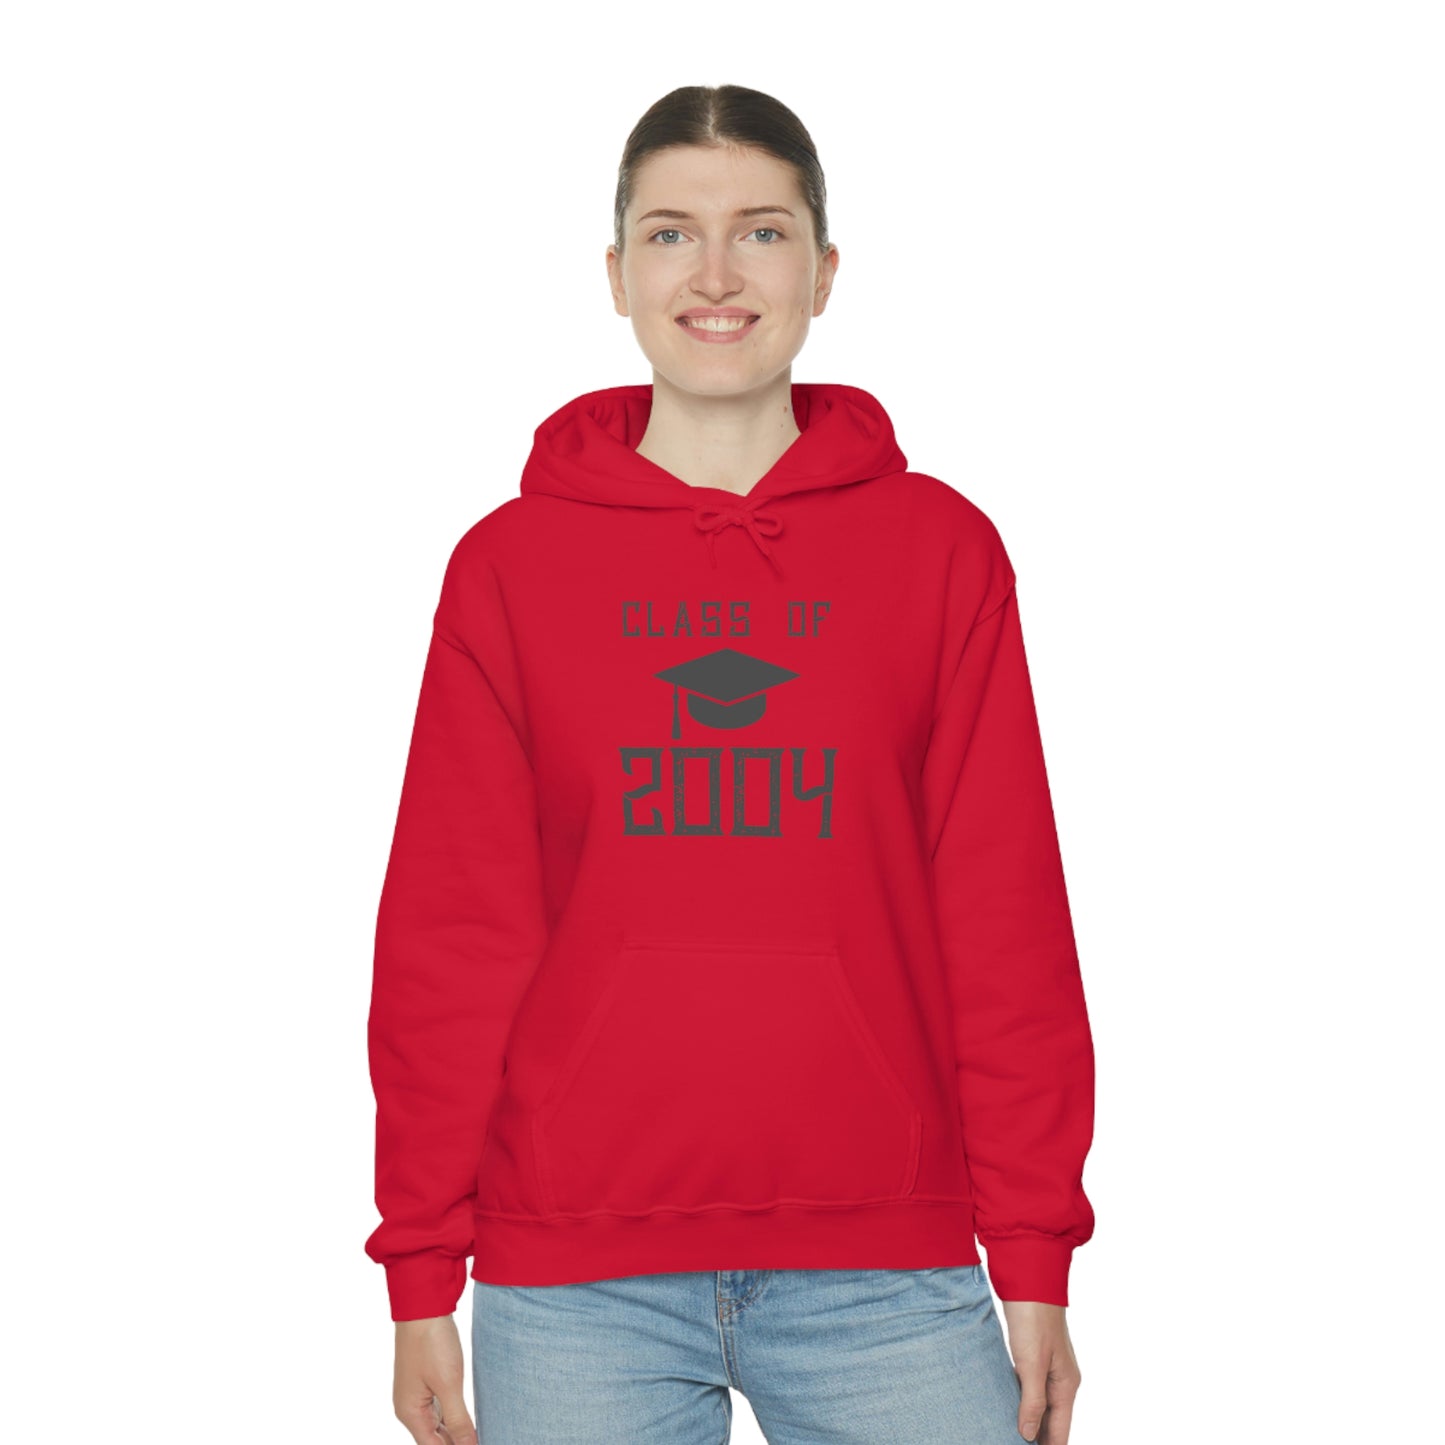 "Class Of 2014" Hoodie - Weave Got Gifts - Unique Gifts You Won’t Find Anywhere Else!